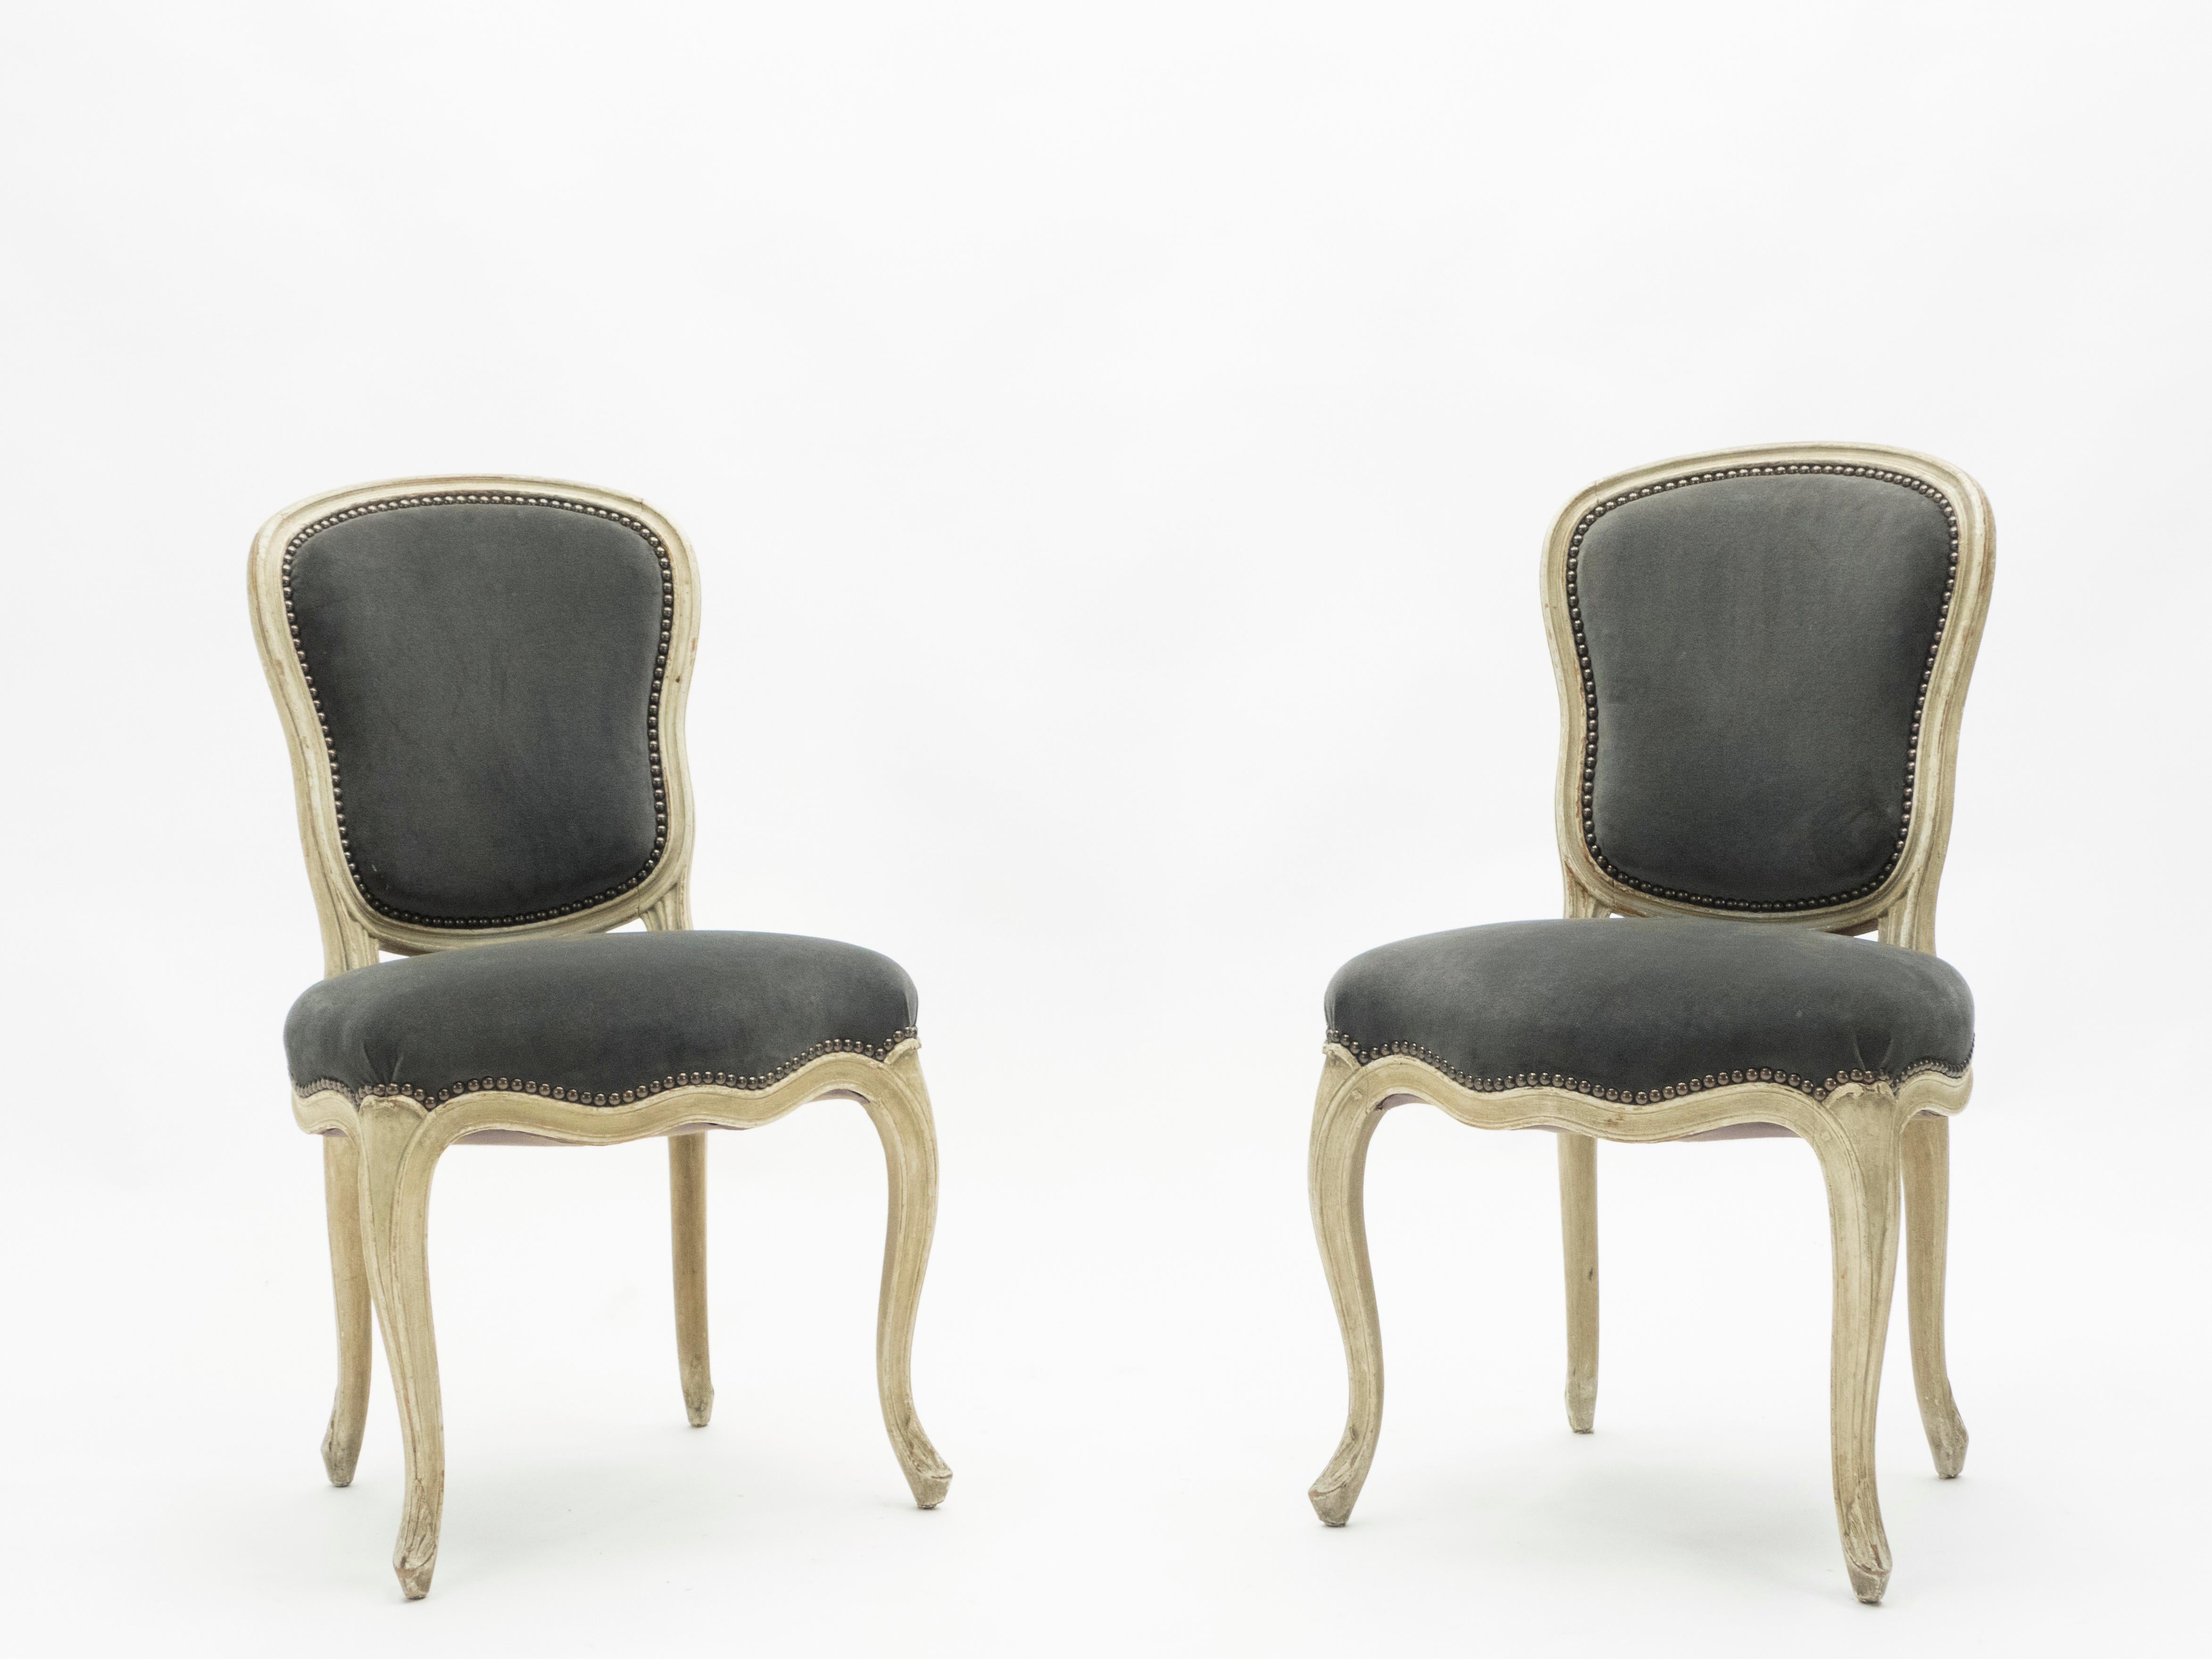 Mid-20th Century Rare Pair of Stamped Maison Jansen Louis XV Neoclassical Chairs, 1940s